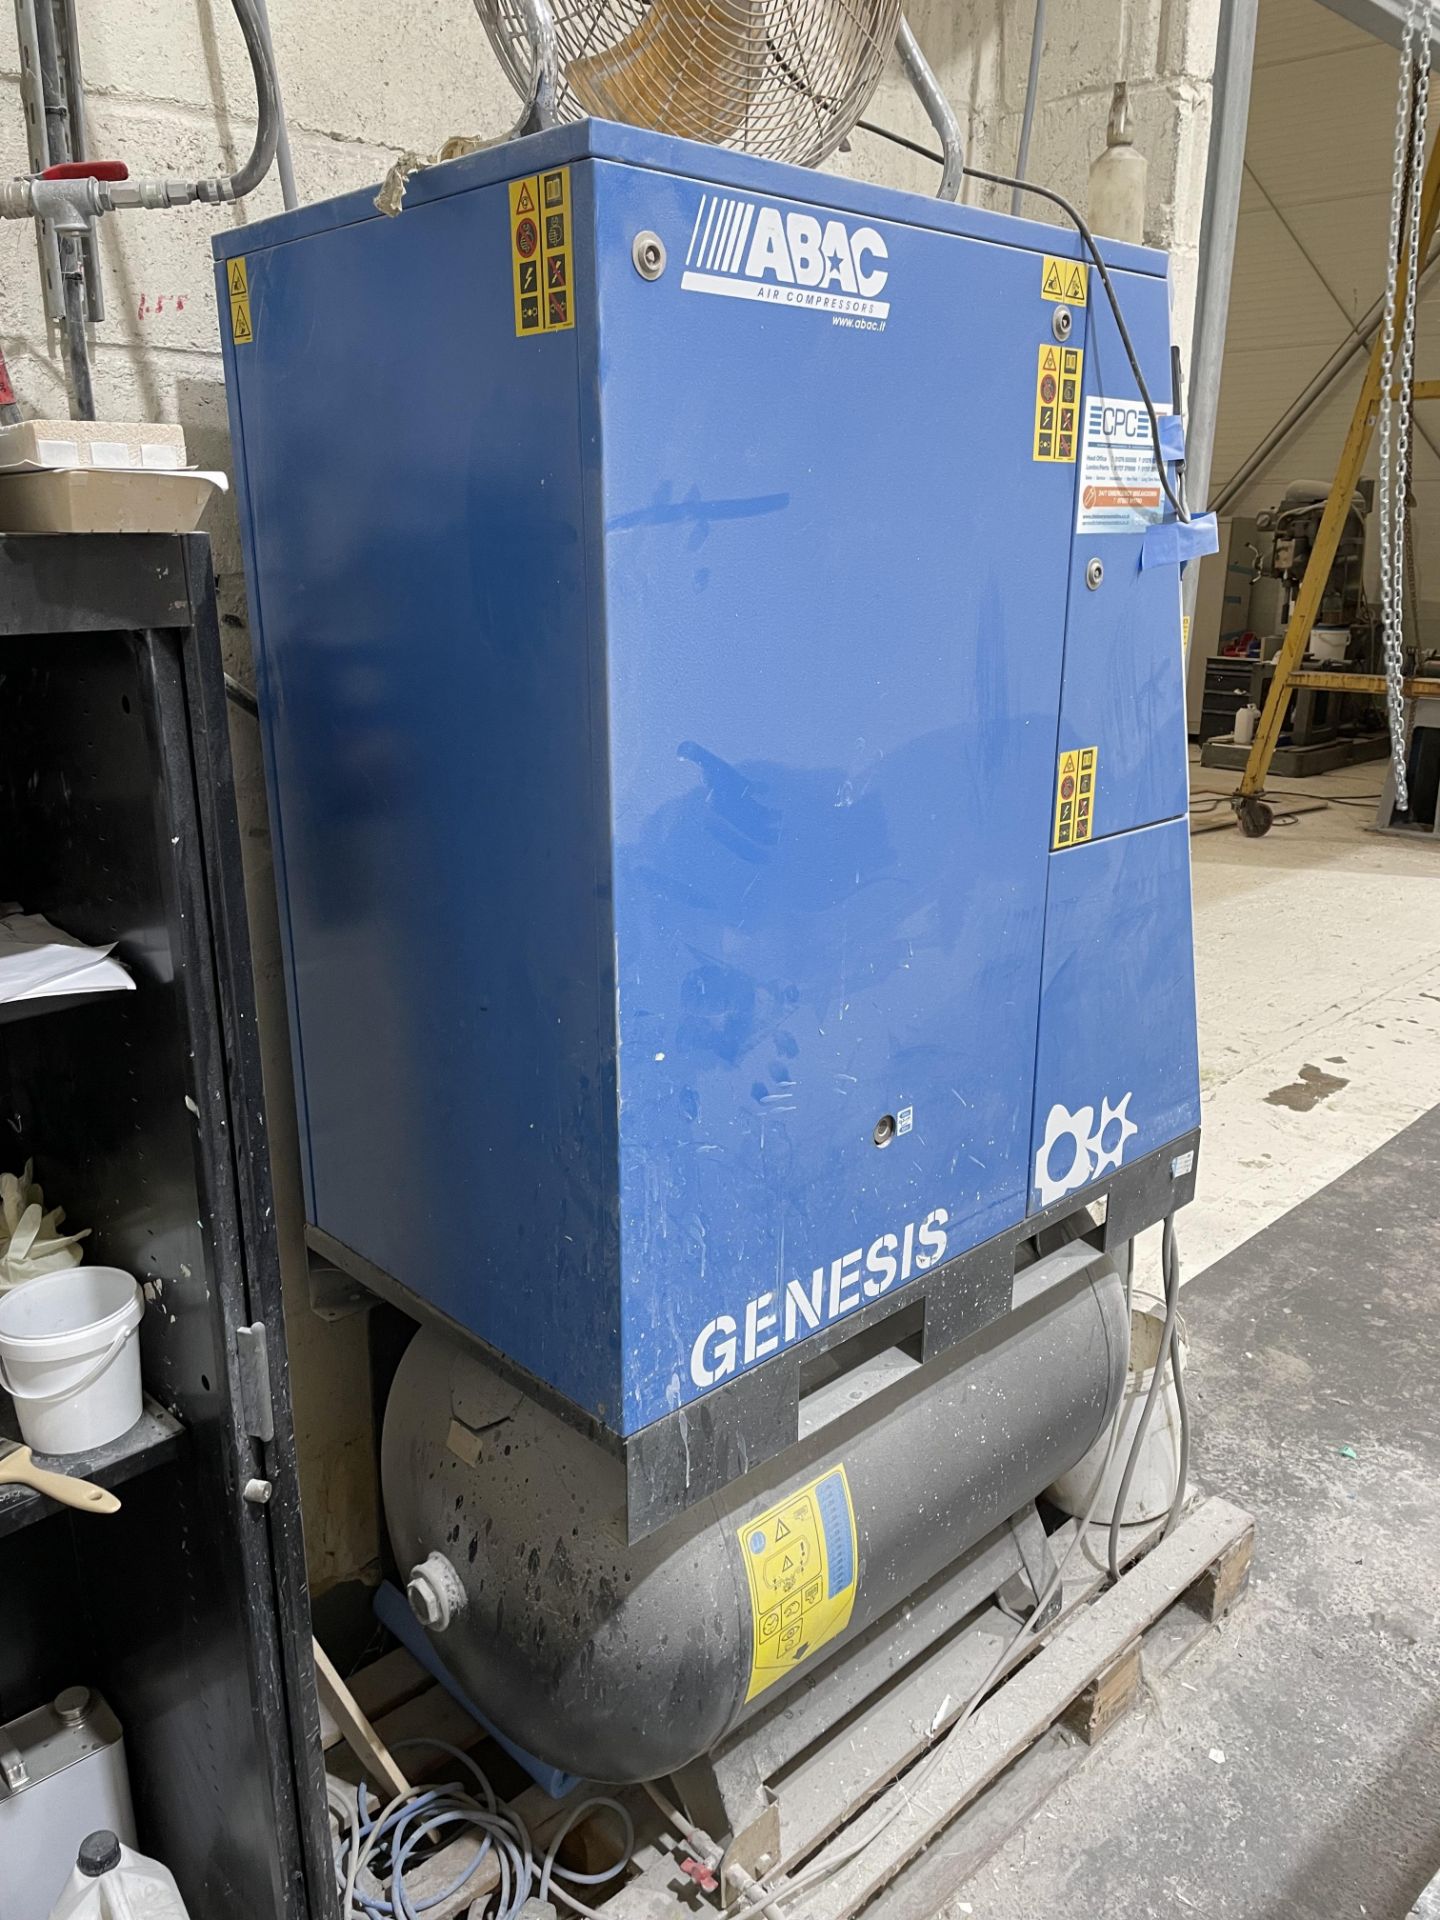 2013 ABAC Genesis 7.5 270 8-Bar Air Compressor Dryer S/No.CAI656742, 3-Phase - Image 2 of 3